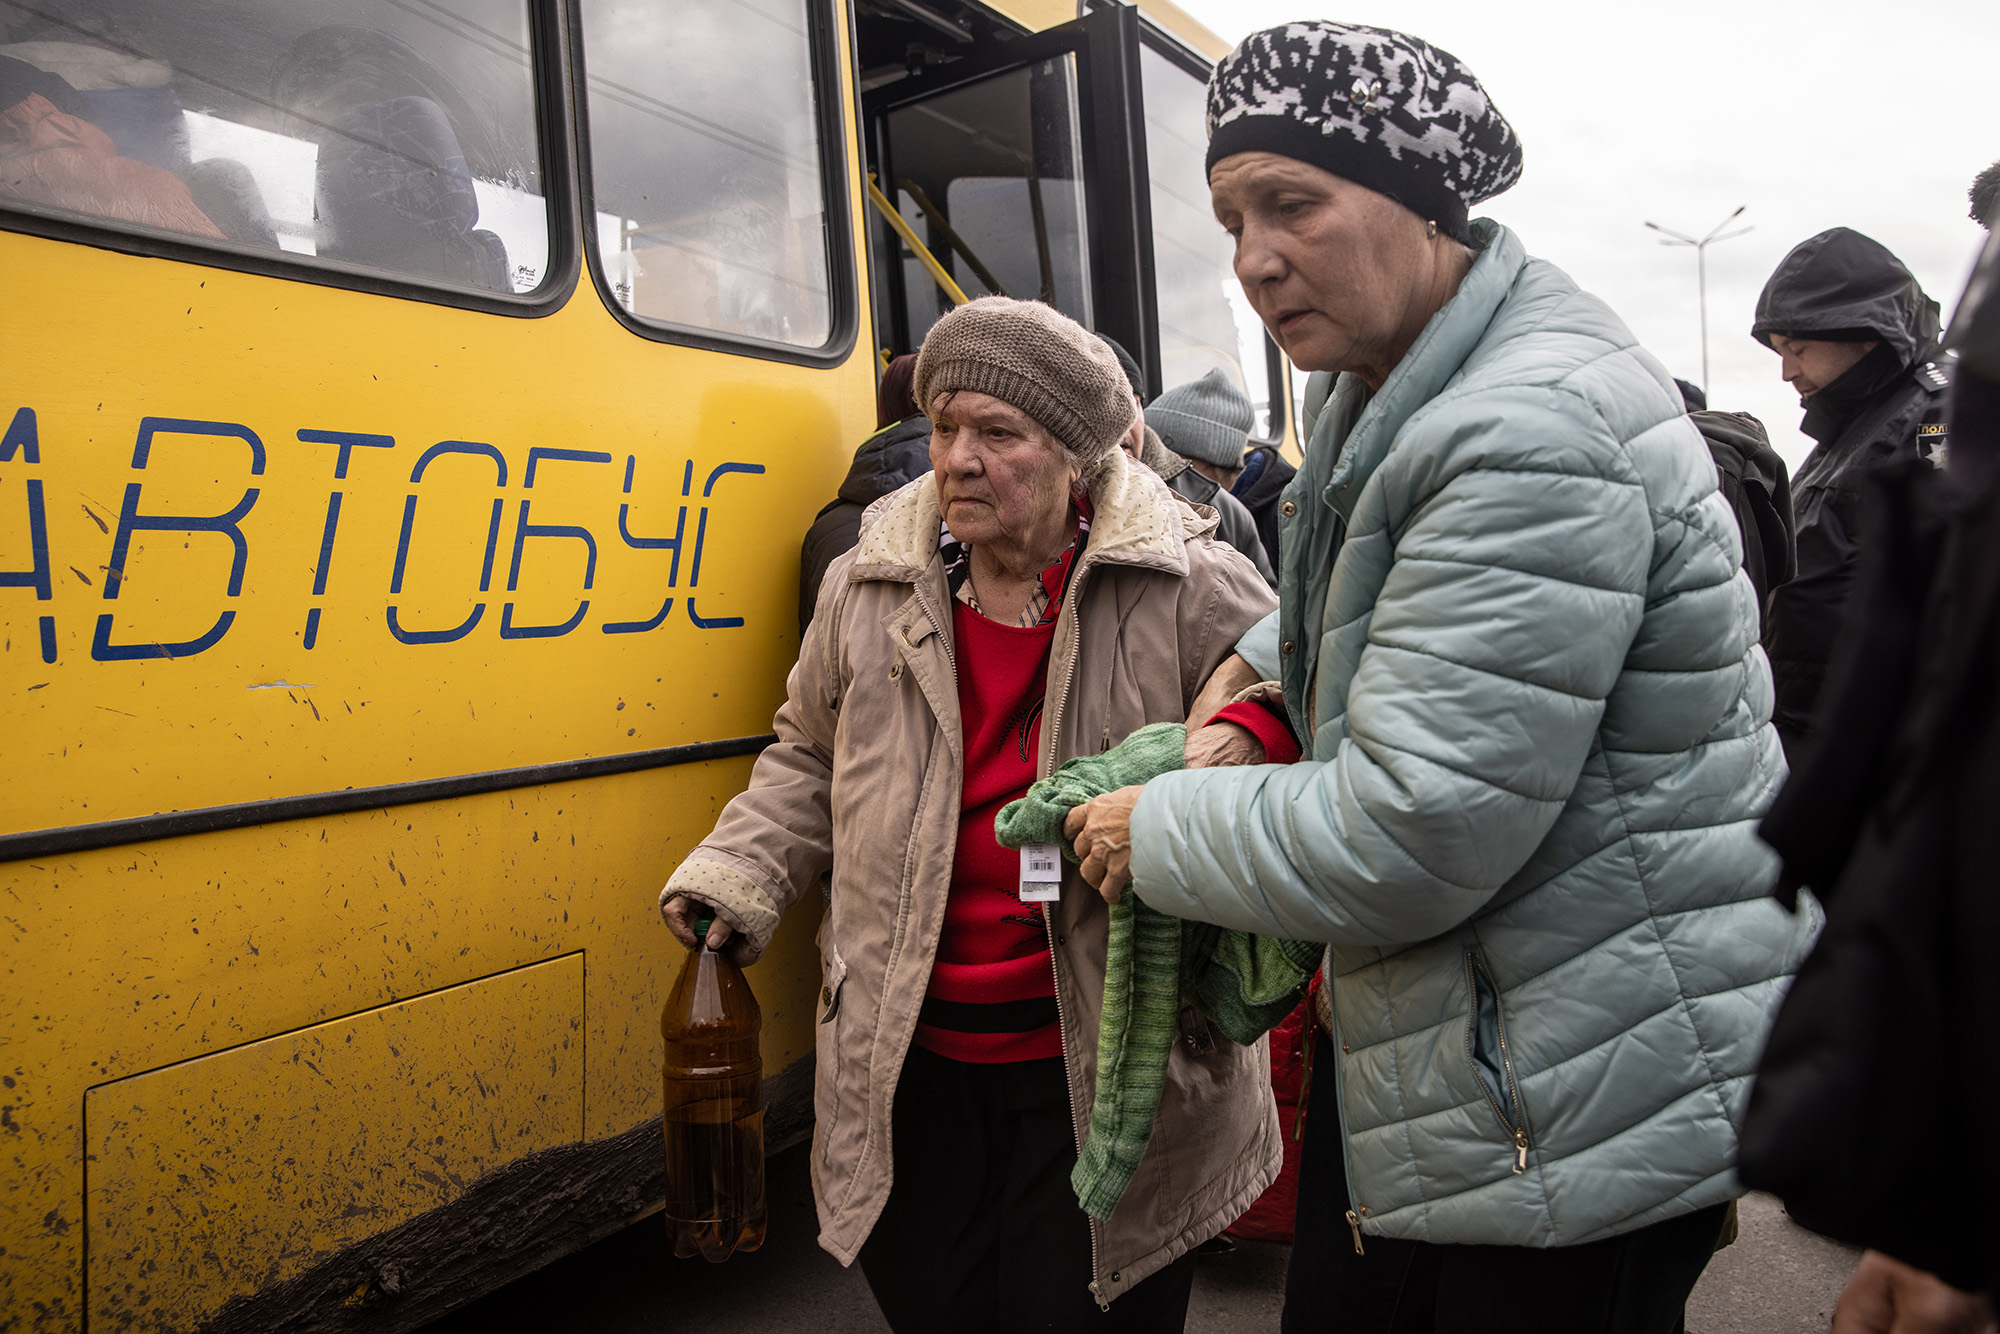 Women from Mariupol disembark at an evacuation point, carrying people from Mariupol, Melitopol and surrounding towns under Russian control, on April 21, in Zaporizhzhia, Ukraine. 